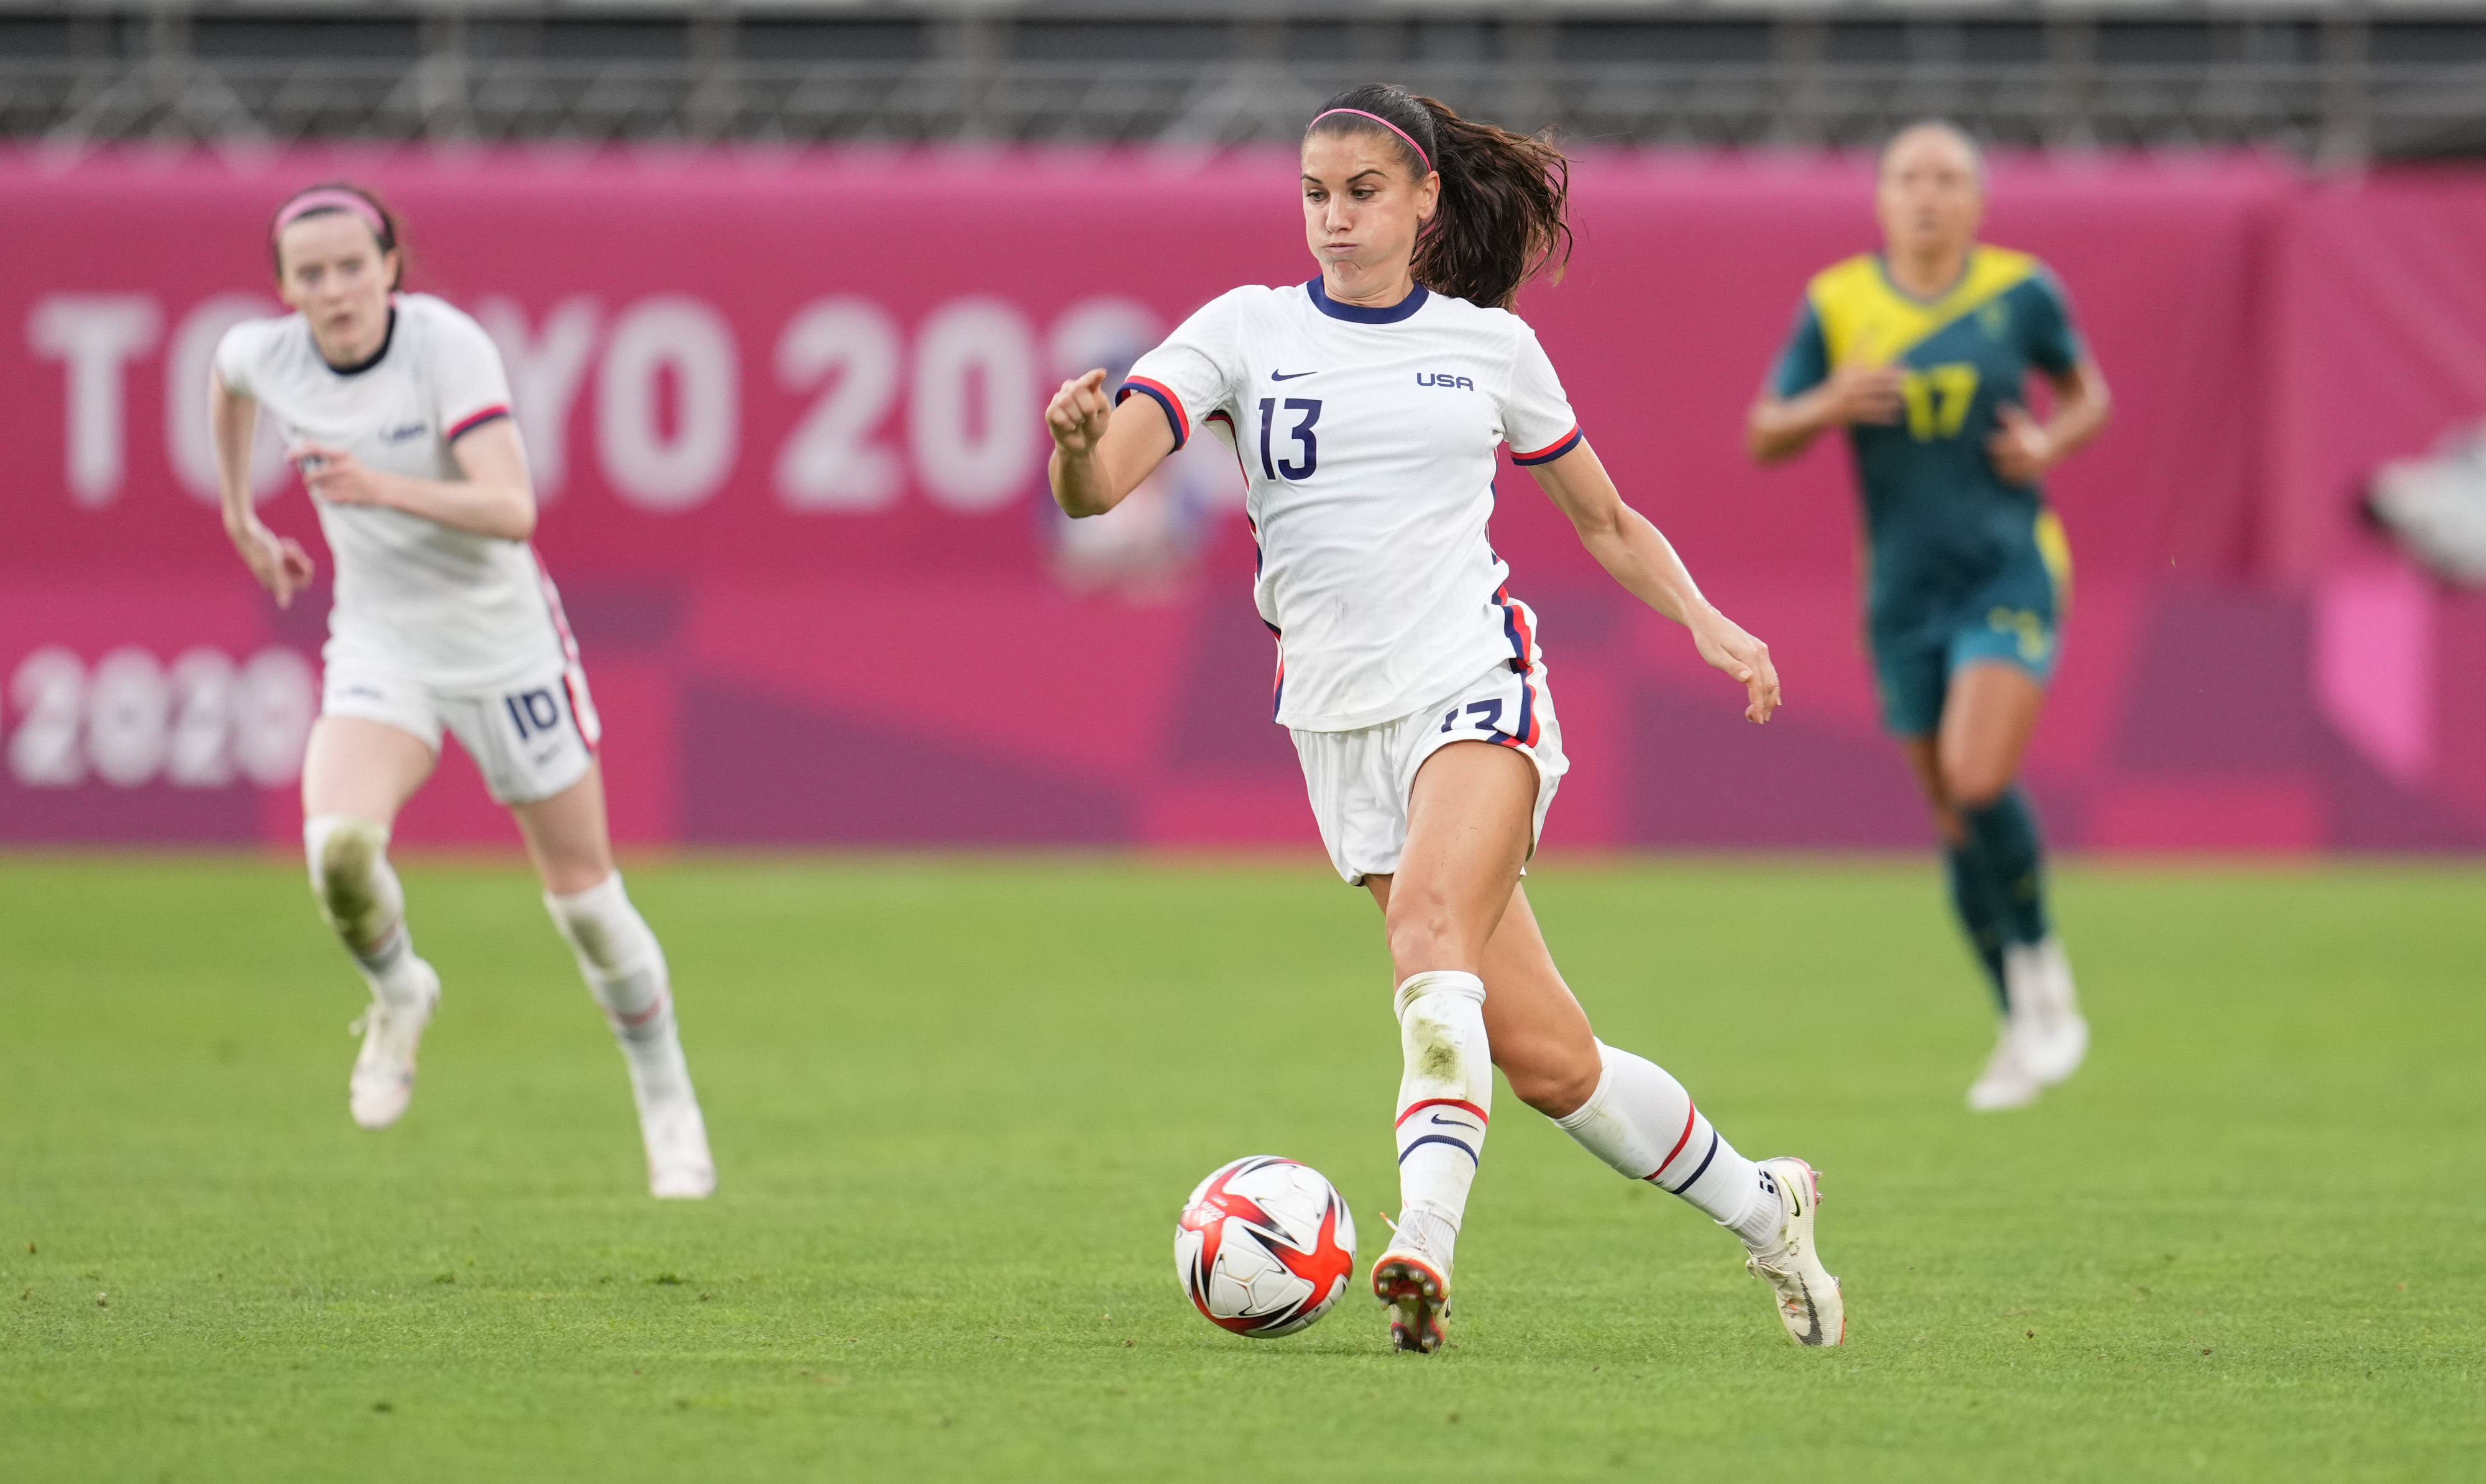 Olympics 2021: USWNT Faces Netherlands In Quarterfinals, Things To Know About Rematch Of 2019 World Cup Final